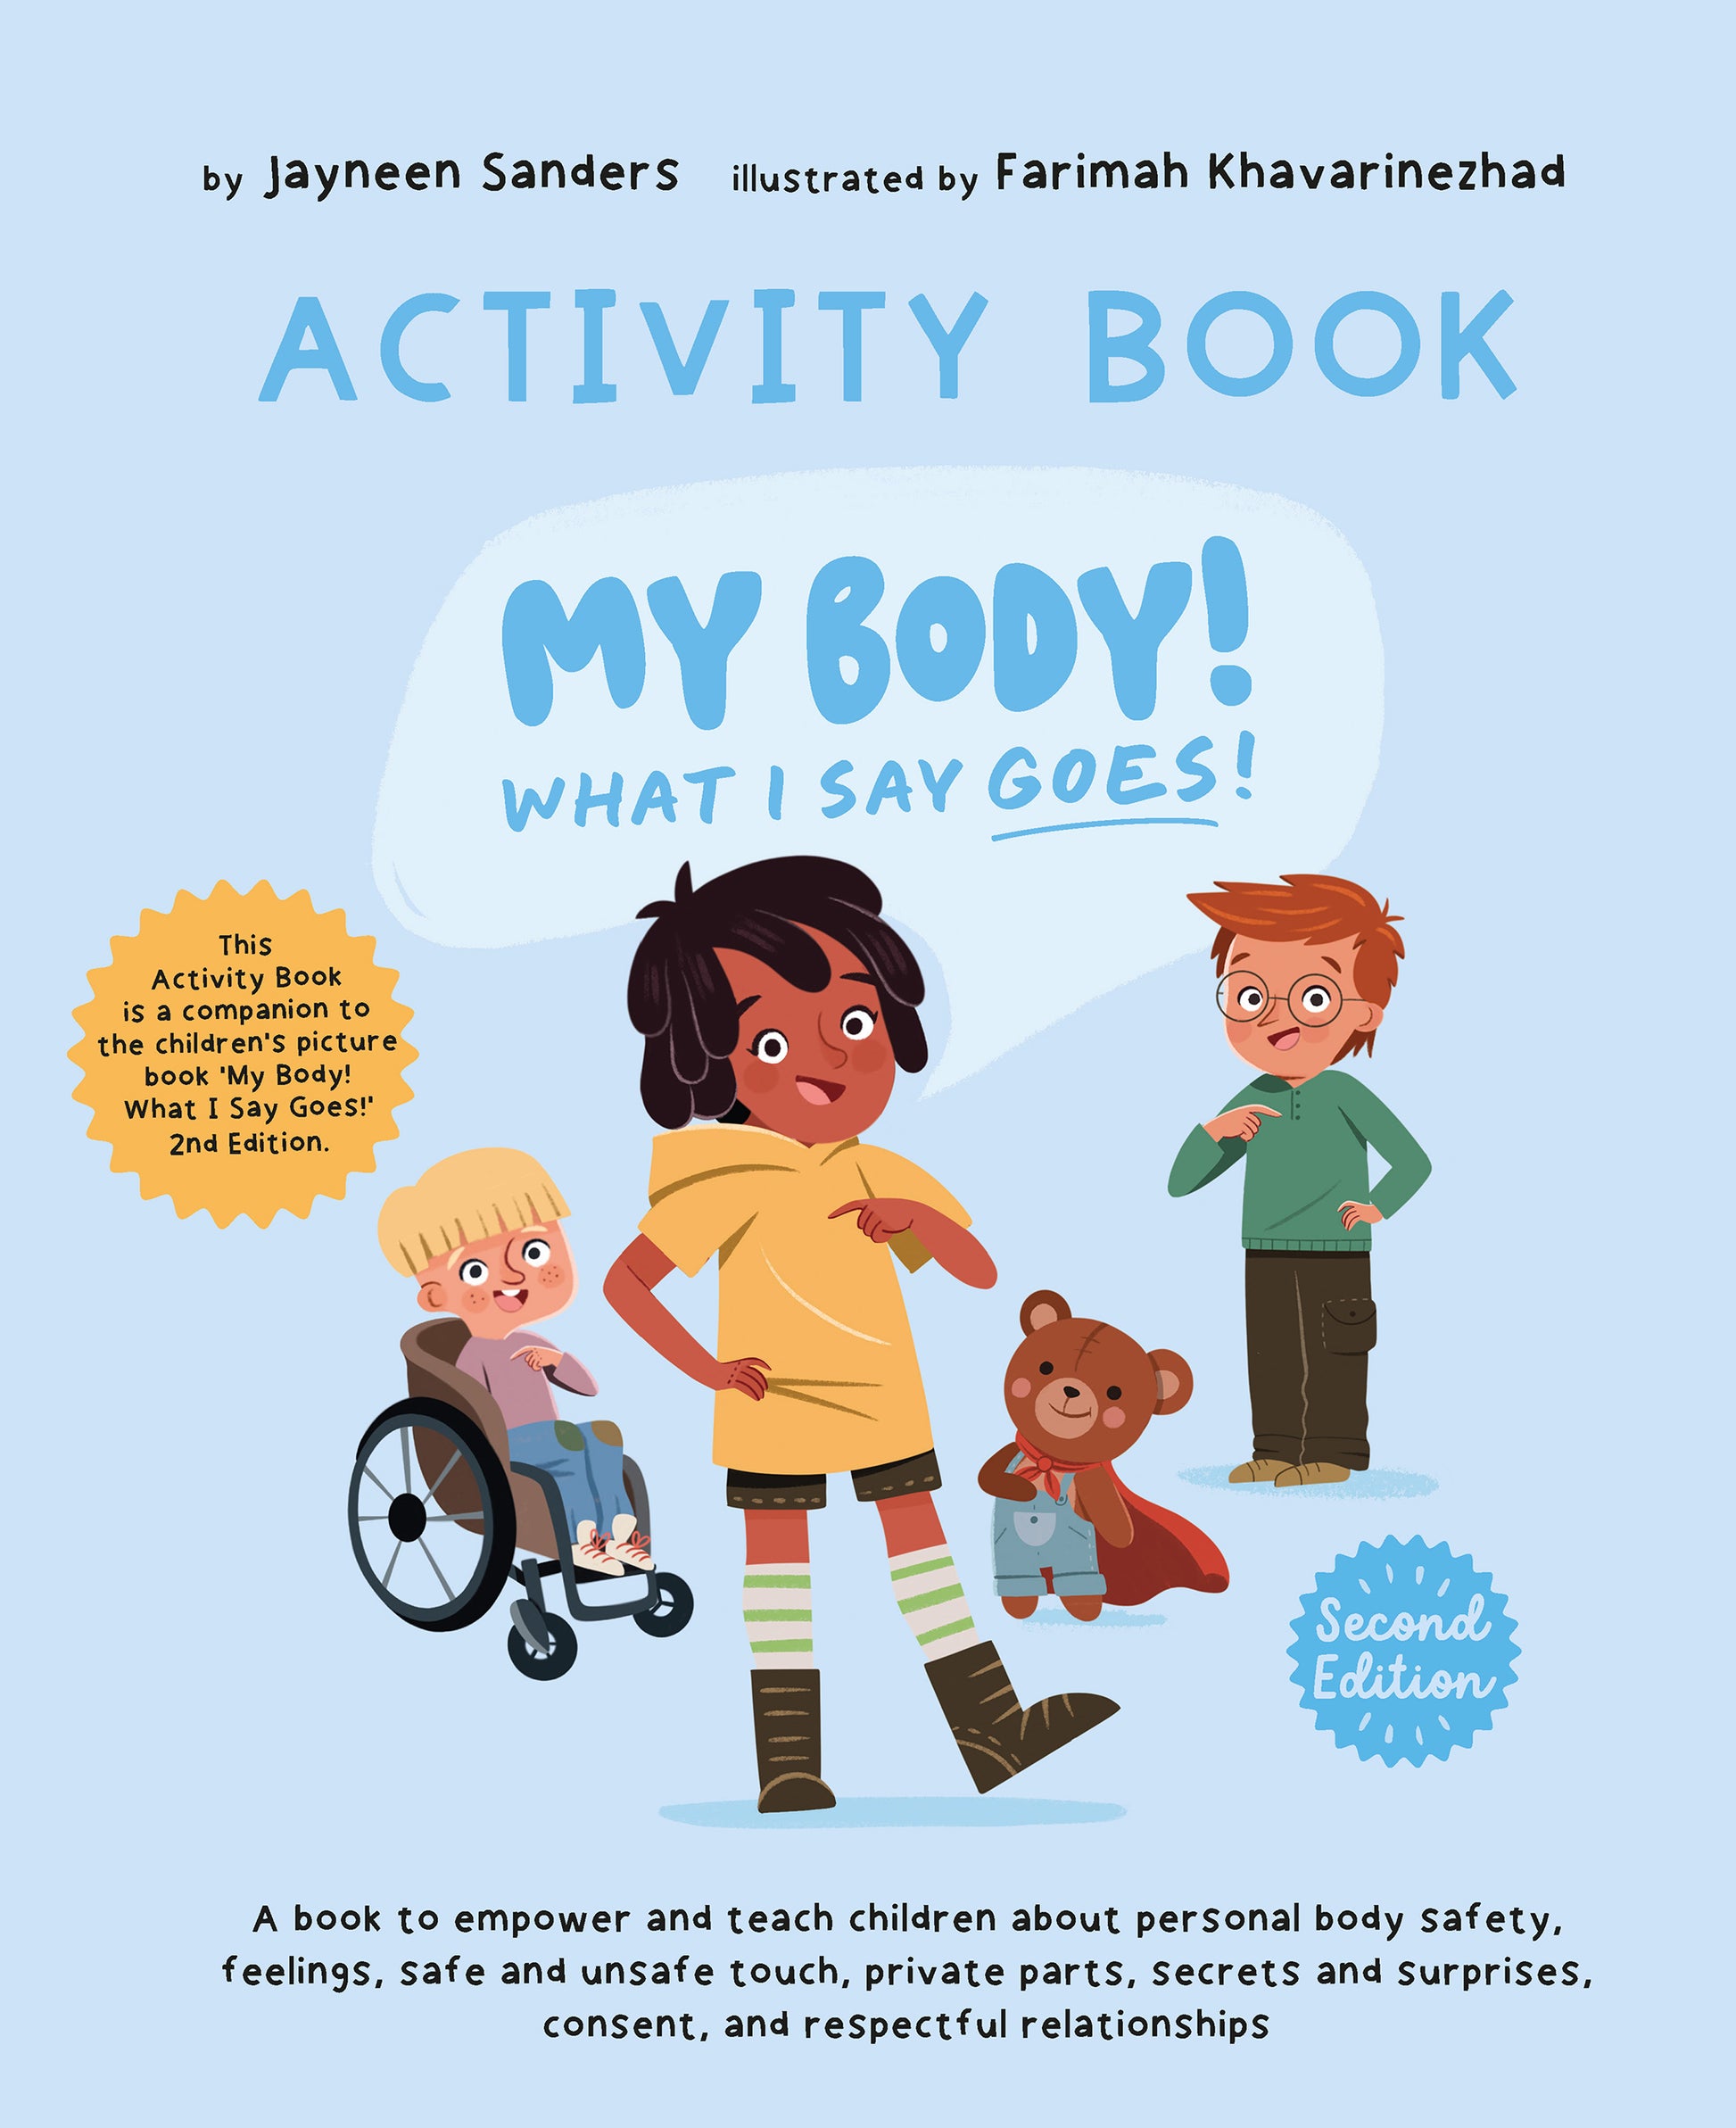 The cover of the book ‘My Body! What I Say Goes! Activity Book’ by Jayneen Sanders.